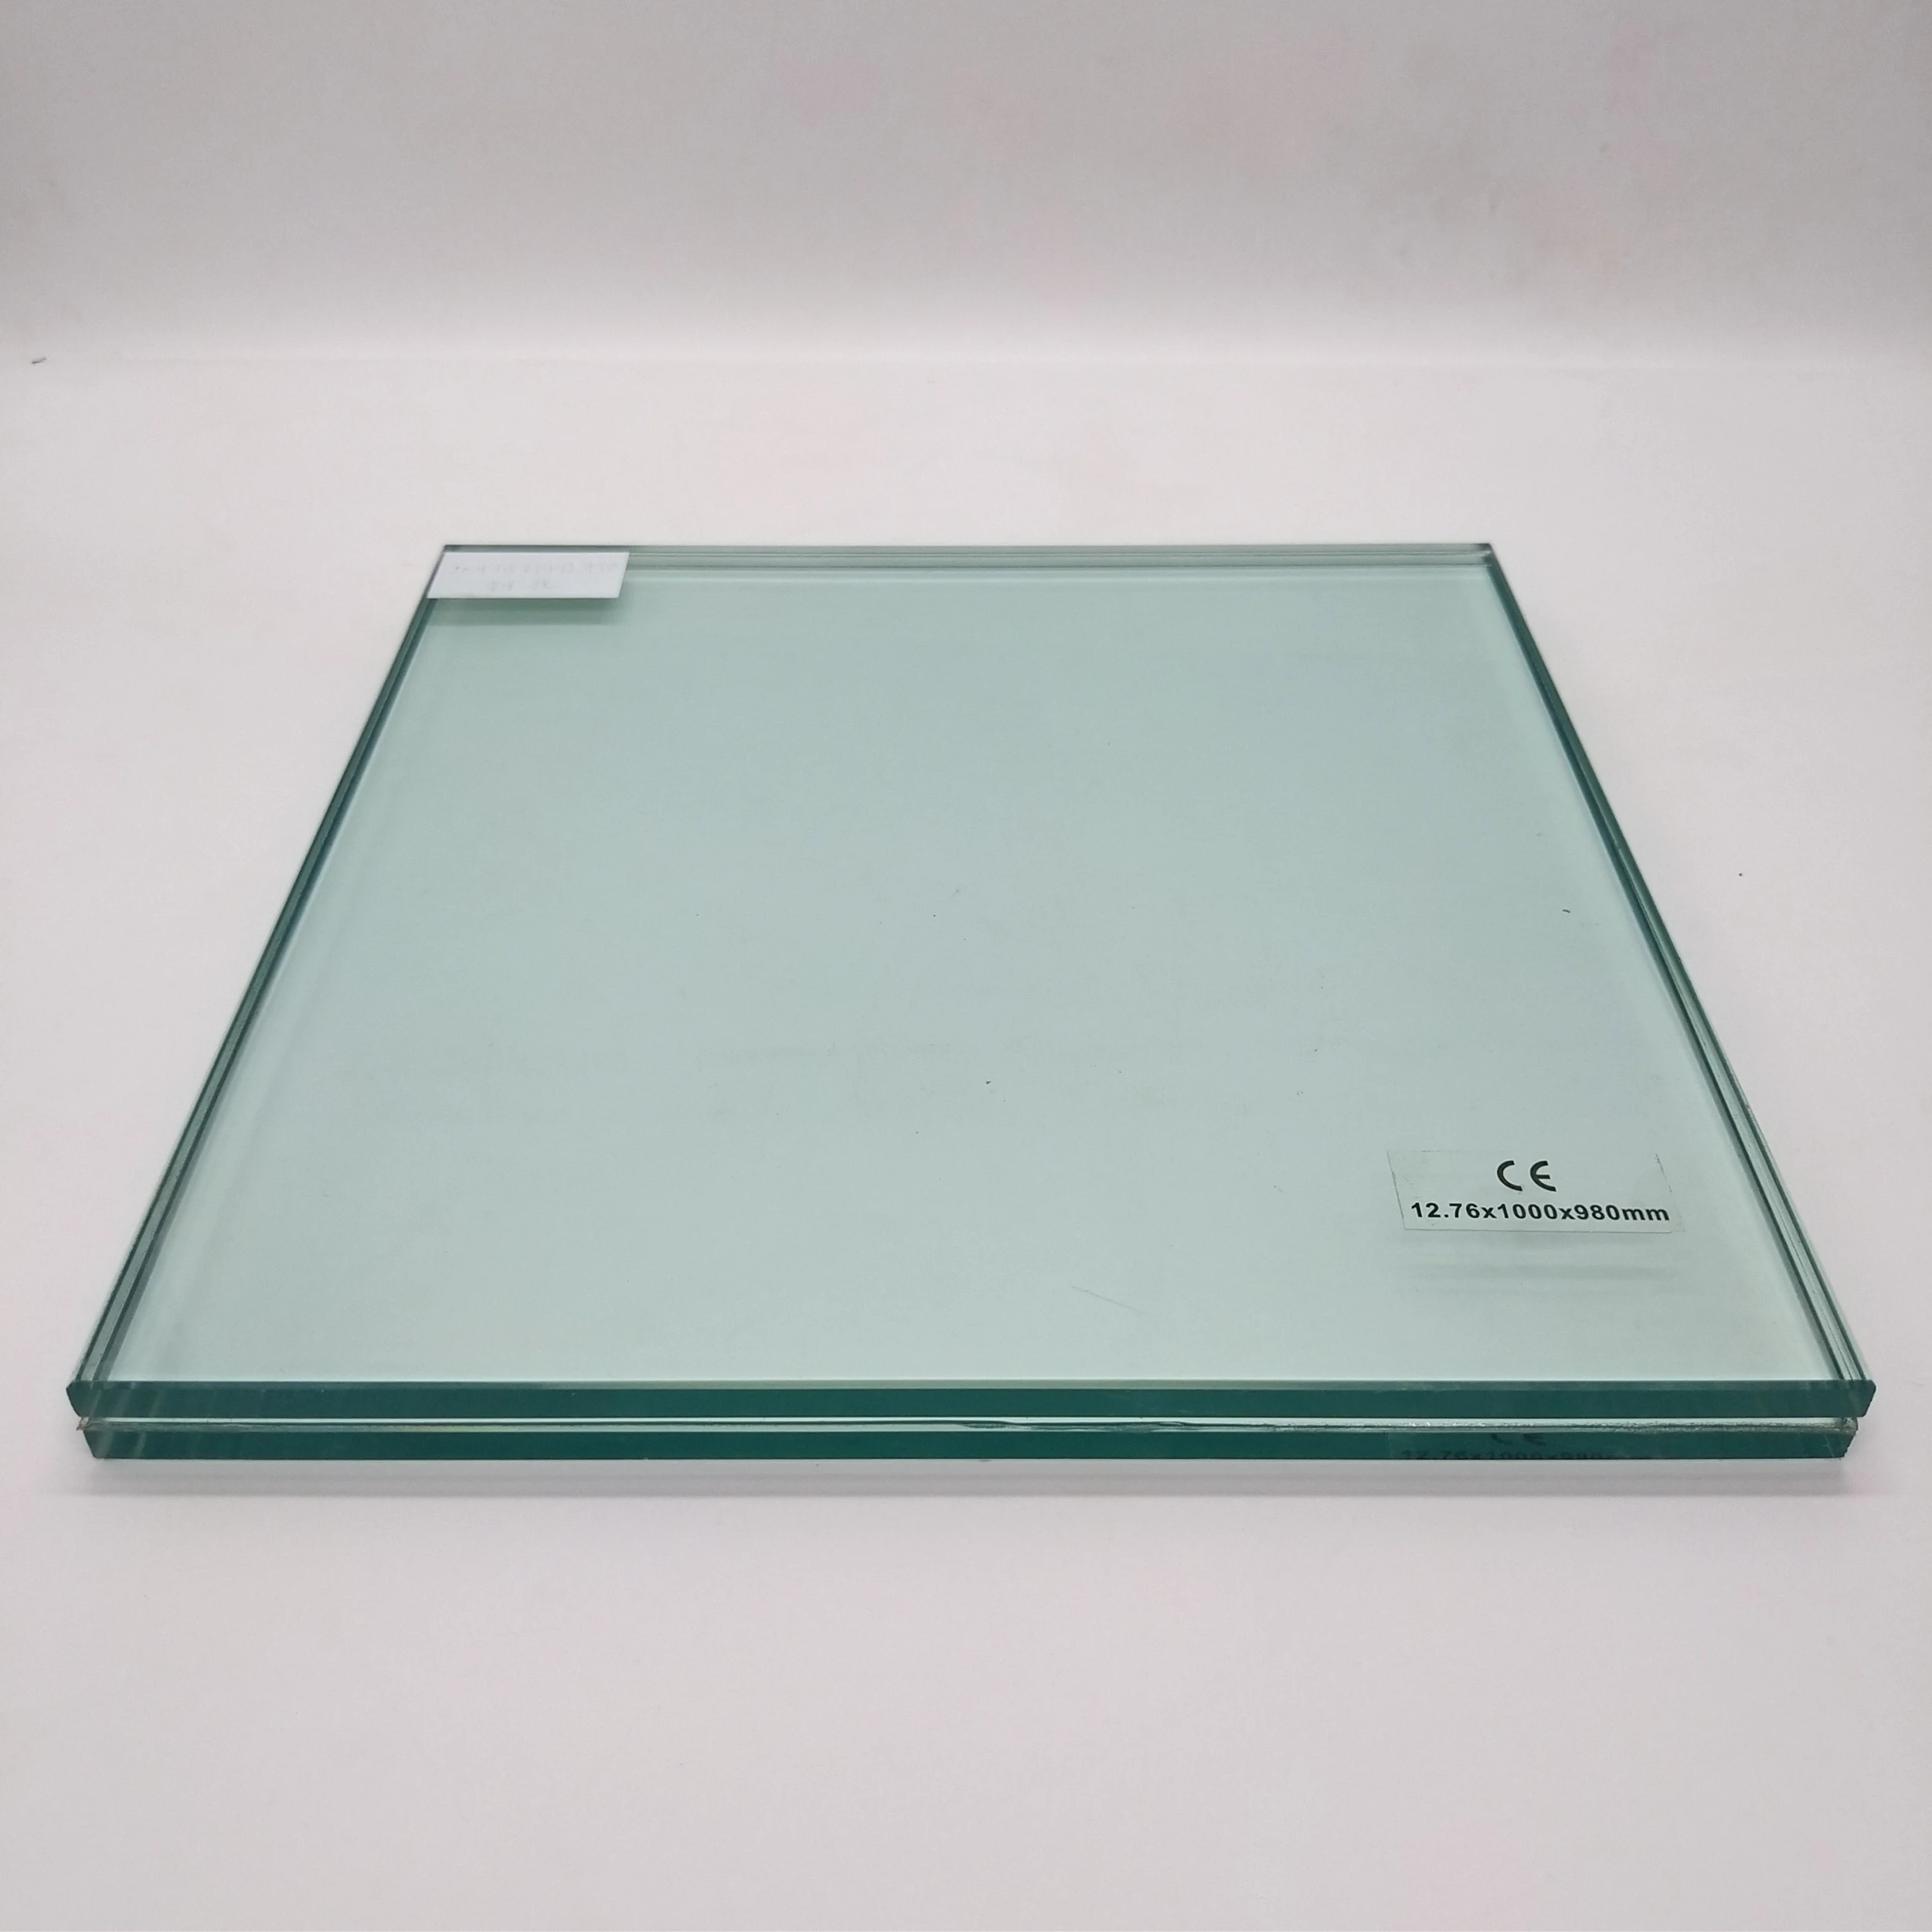 High Quality Laminated Glass With Waterproof And Explosion-proof For ...